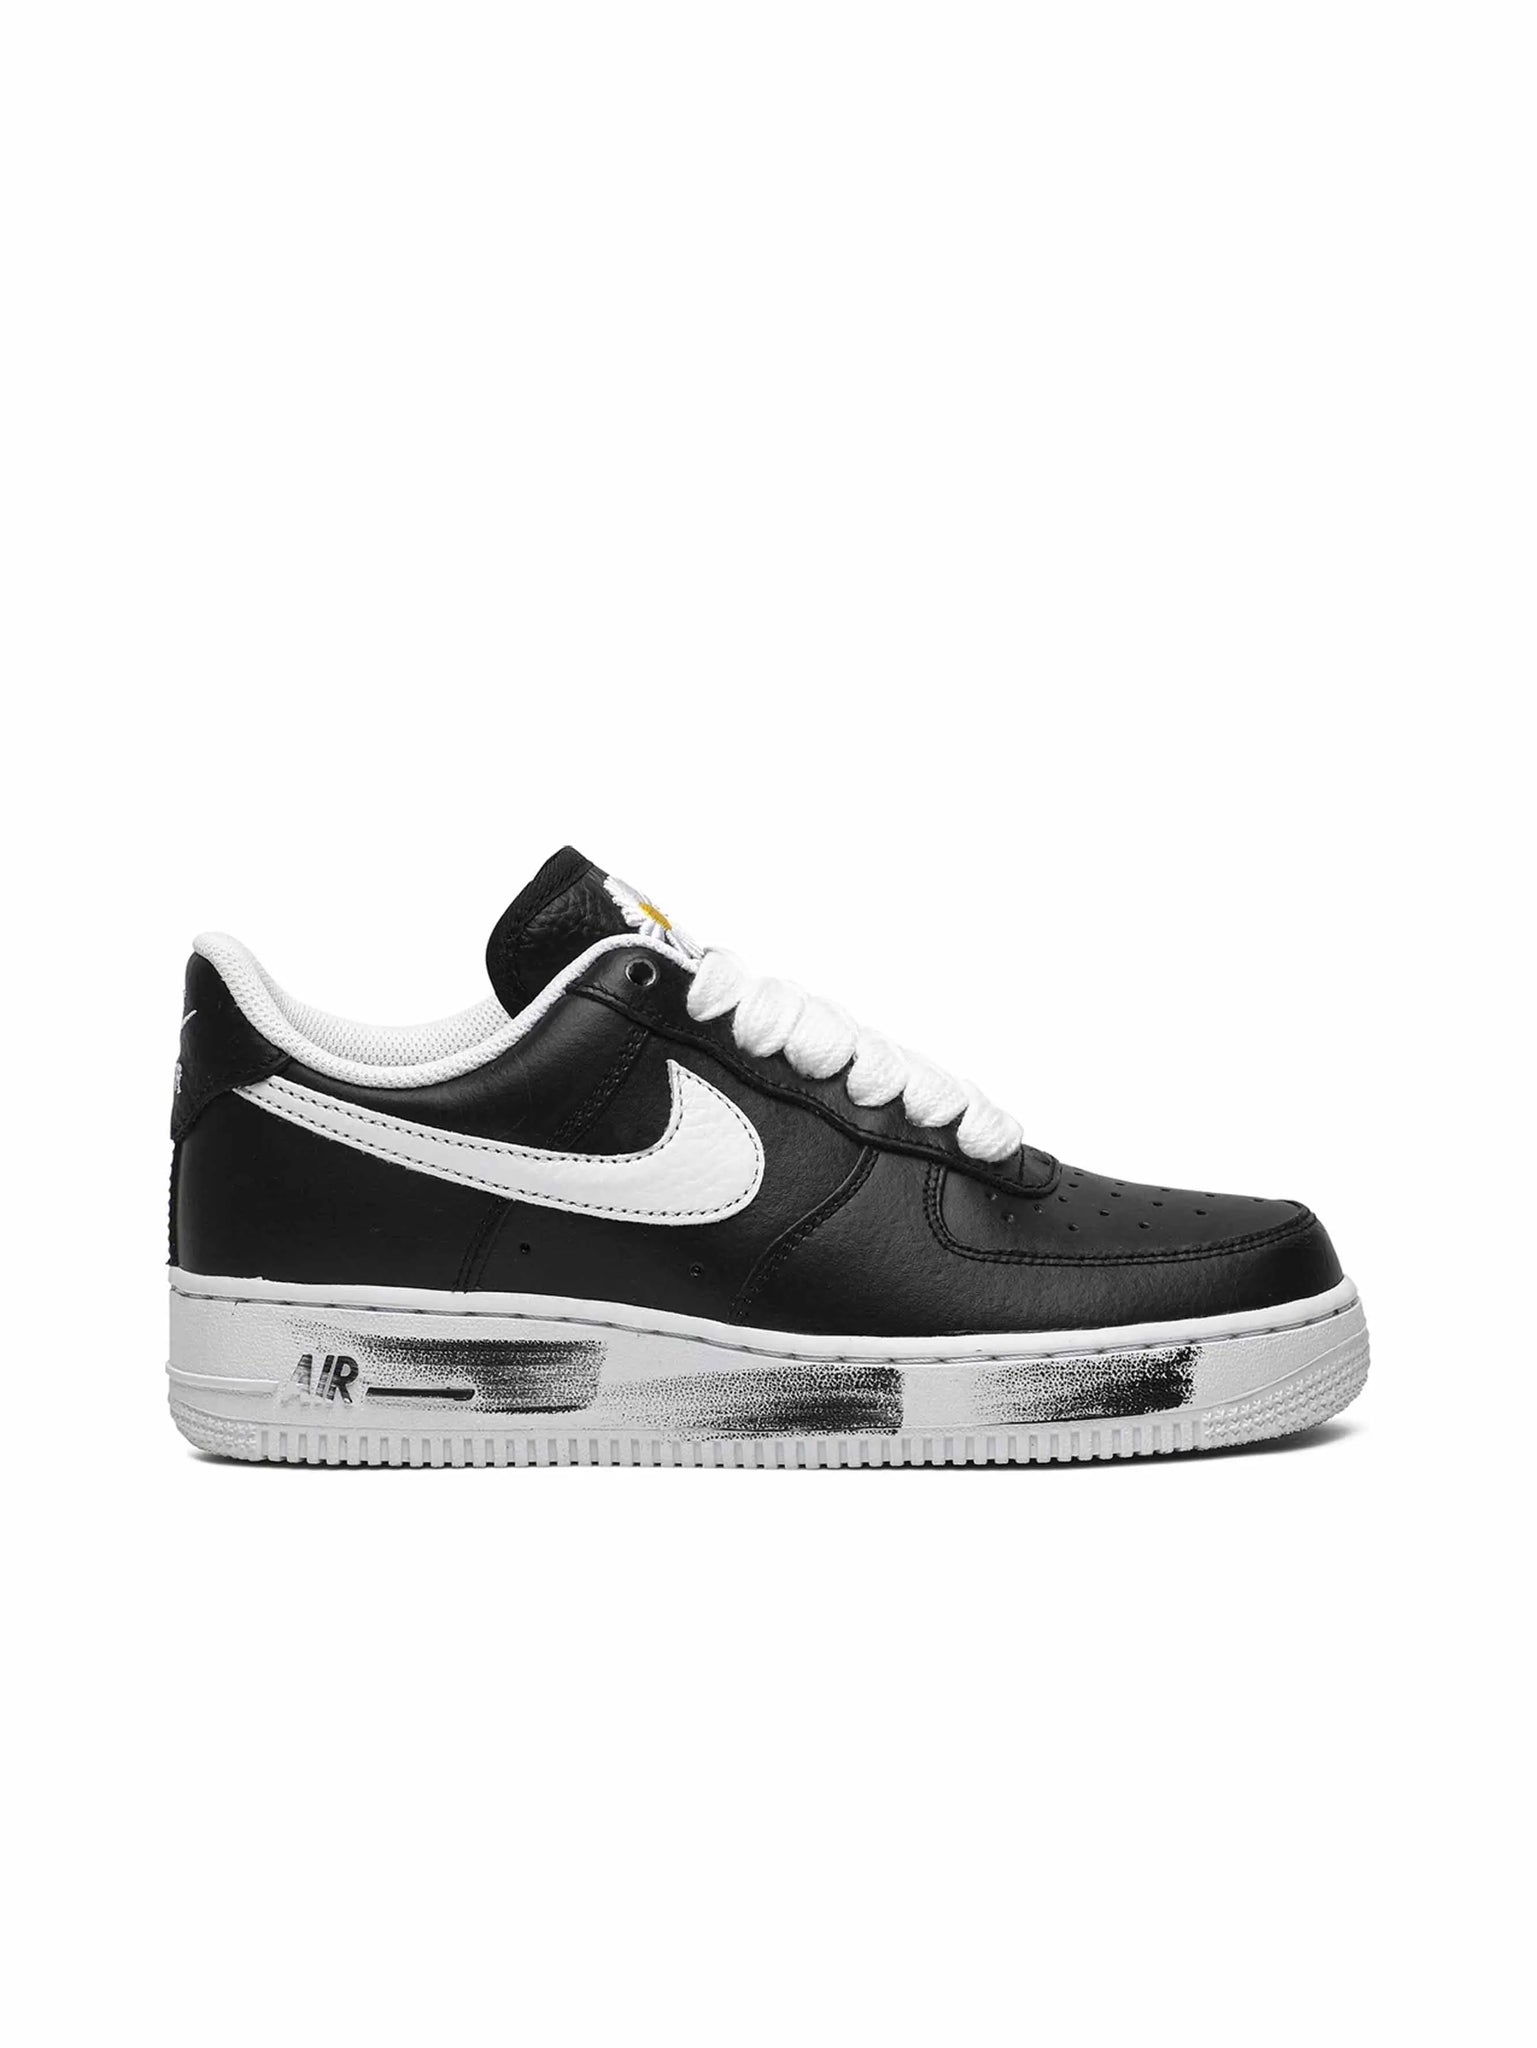 Nike Air Force 1 Low G-Dragon Peaceminusone Para-Noise in Auckland, New Zealand - Shop name